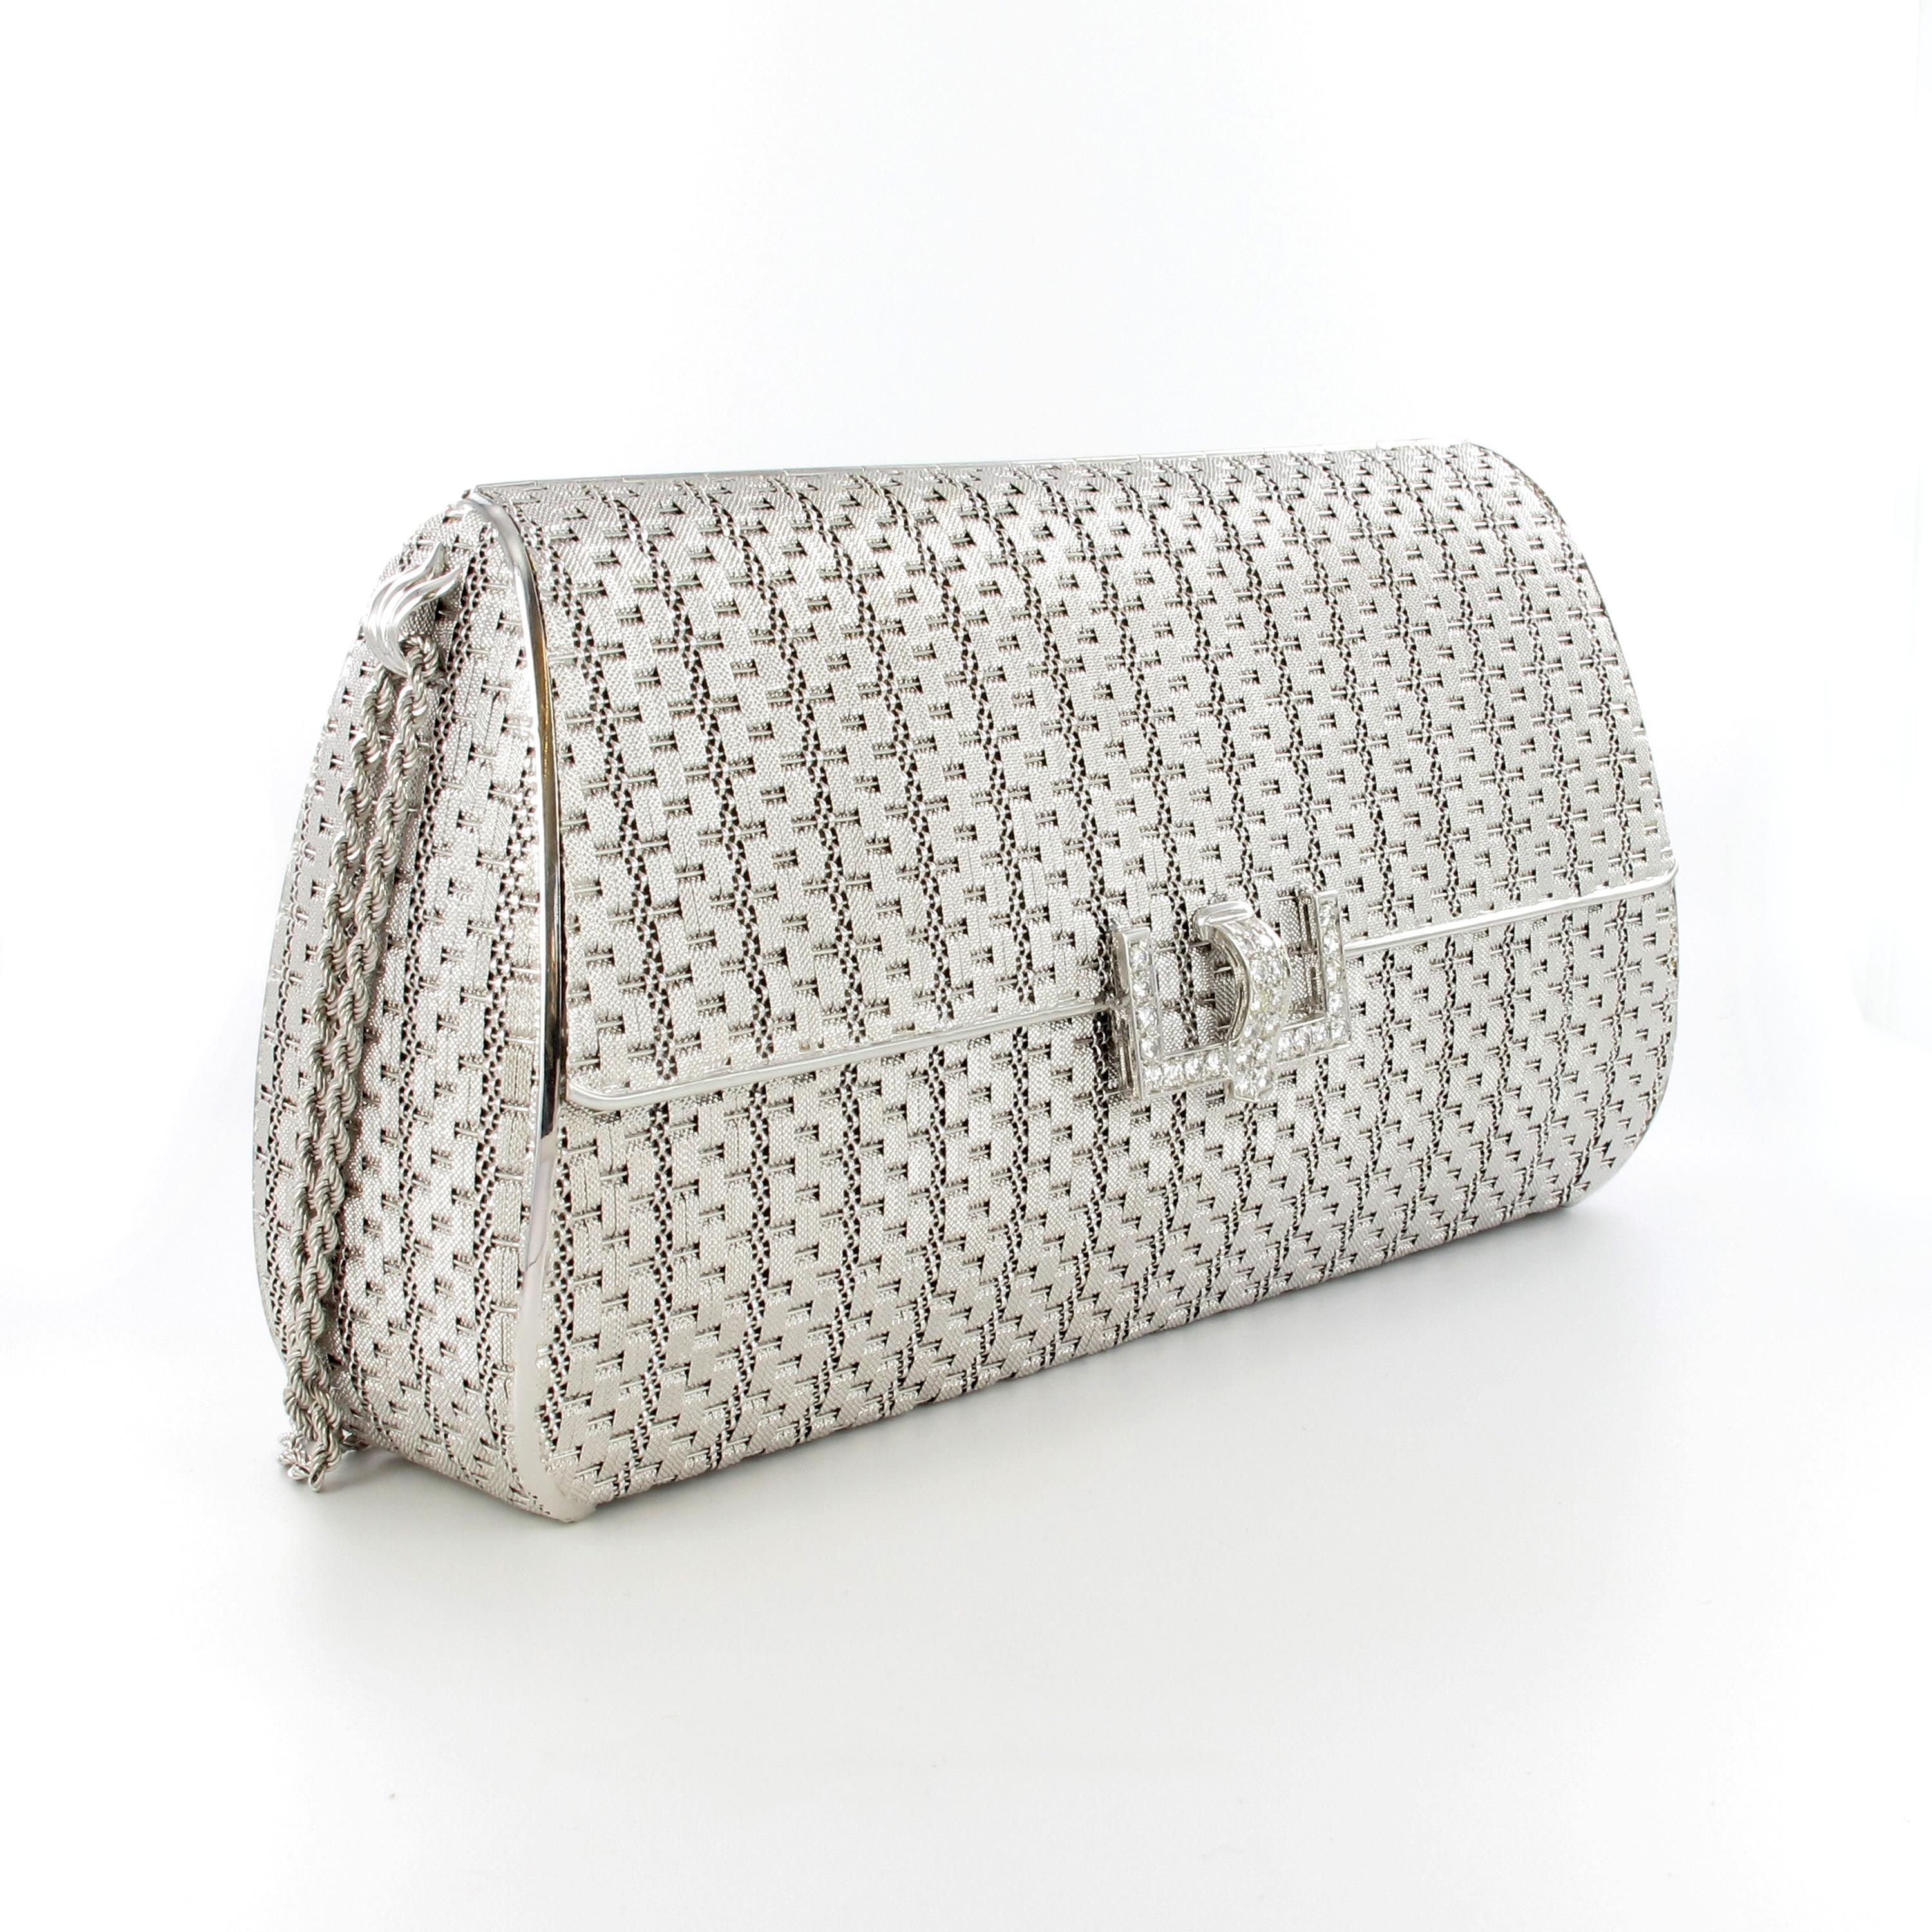 Clutch evening bags were en vogue throughout many different decades in the past, seeing its conception in the 1920’s when short hair and small pochettes, the first version of the clutch, were the top fashion must haves of the day.

The textured and